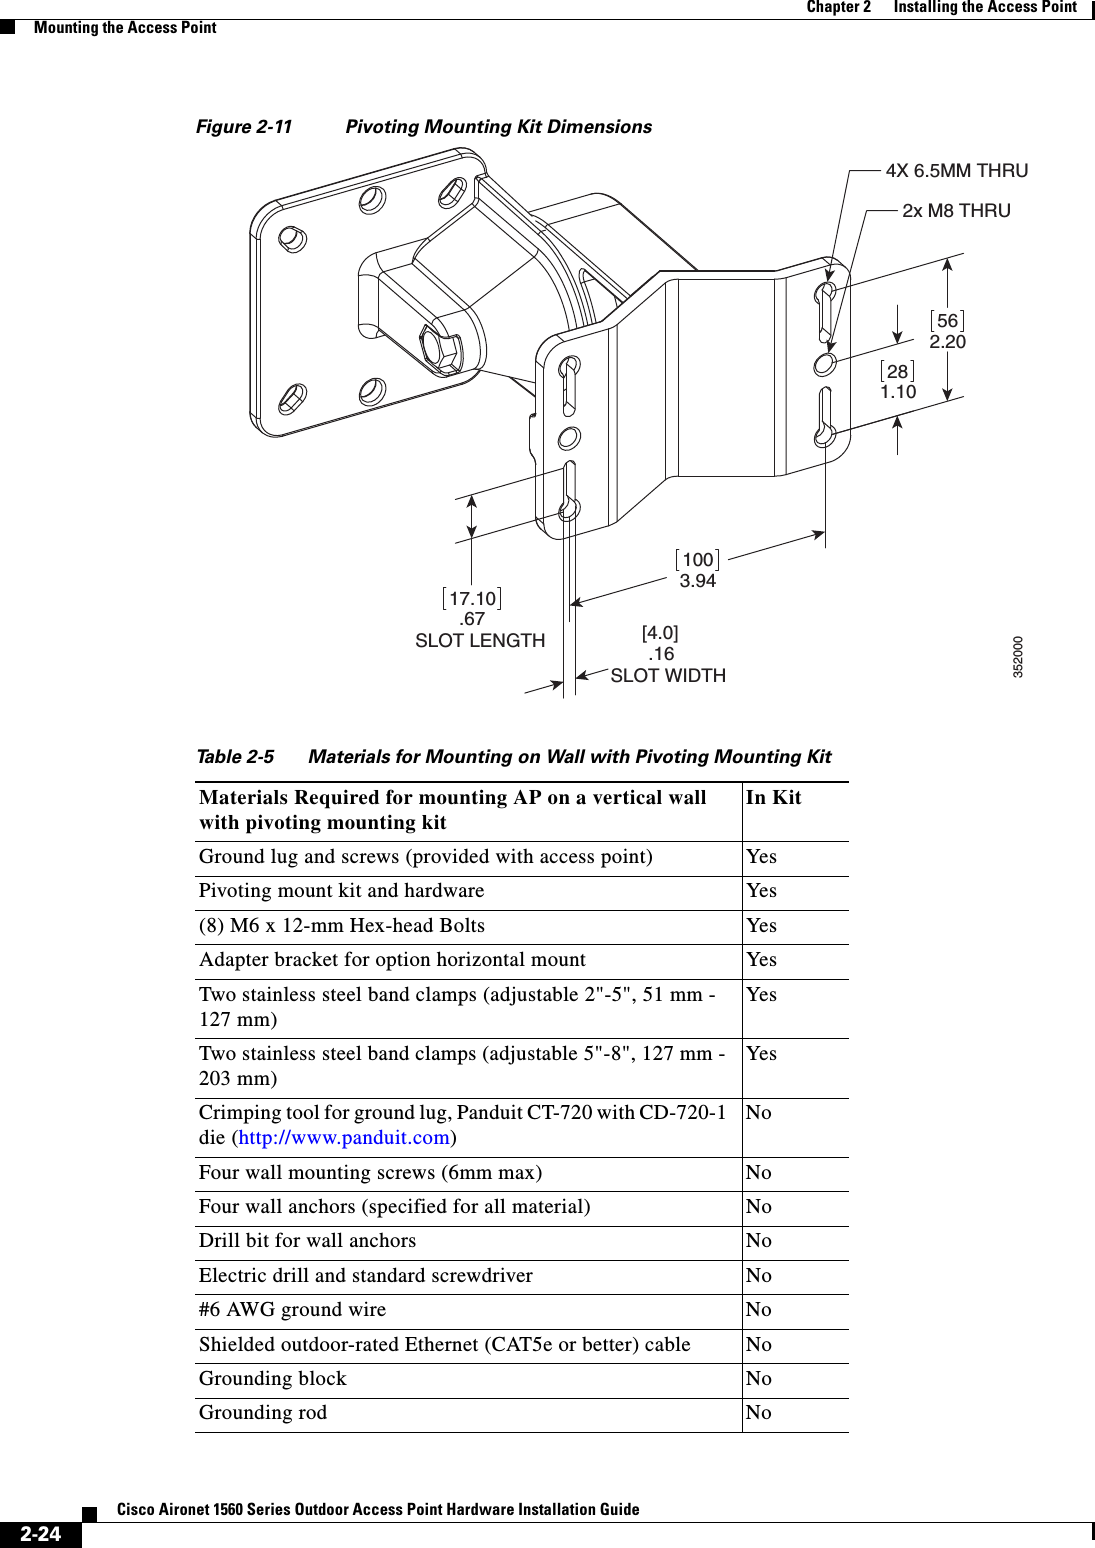  2-24Cisco Aironet 1560 Series Outdoor Access Point Hardware Installation Guide Chapter 2      Installing the Access PointMounting the Access PointFigure 2-11 Pivoting Mounting Kit Dimensions  Table 2-5 Materials for Mounting on Wall with Pivoting Mounting Kit3520001003.94281.10562.20 2x M8 THRU  4X 6.5MM THRU 17.10.67SLOT LENGTH [4.0].16SLOT WIDTHMaterials Required for mounting AP on a vertical wall with pivoting mounting kitIn KitGround lug and screws (provided with access point) YesPivoting mount kit and hardware Yes(8) M6 x 12-mm Hex-head Bolts YesAdapter bracket for option horizontal mount YesTwo stainless steel band clamps (adjustable 2&quot;-5&quot;, 51 mm - 127 mm)YesTwo stainless steel band clamps (adjustable 5&quot;-8&quot;, 127 mm - 203 mm)YesCrimping tool for ground lug, Panduit CT-720 with CD-720-1 die (http://www.panduit.com)NoFour wall mounting screws (6mm max) NoFour wall anchors (specified for all material) NoDrill bit for wall anchors NoElectric drill and standard screwdriver No#6 AWG ground wire NoShielded outdoor-rated Ethernet (CAT5e or better) cable NoGrounding block NoGrounding rod No